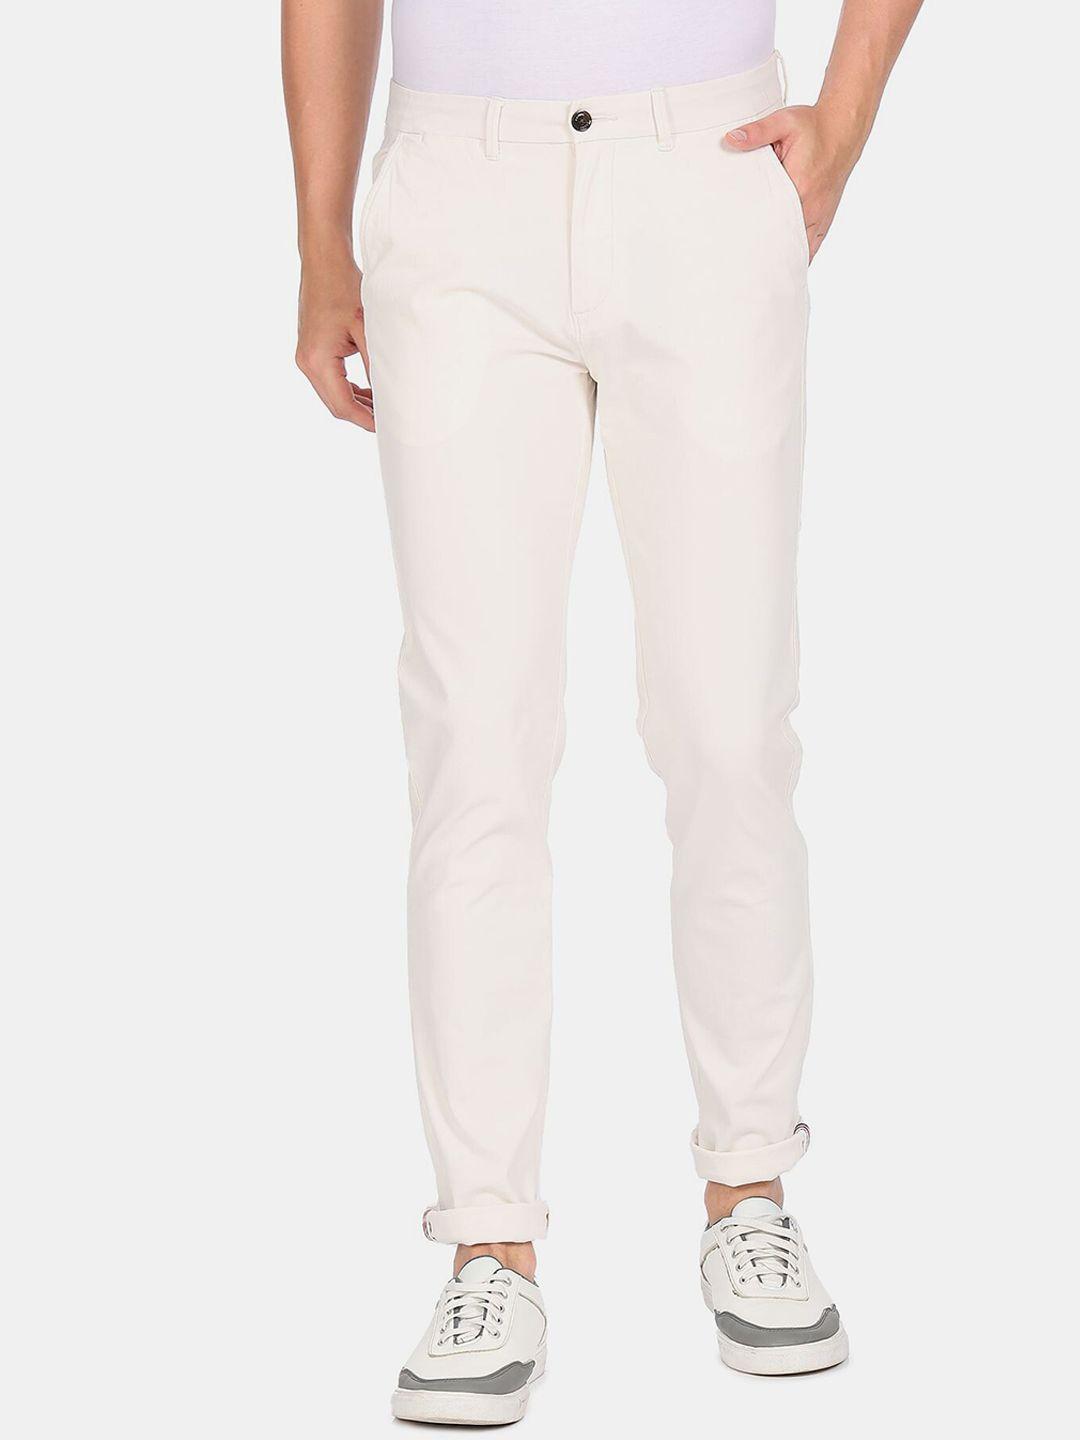 arrow-sport-men-white-skinny-fit-low-rise-casual-trousers